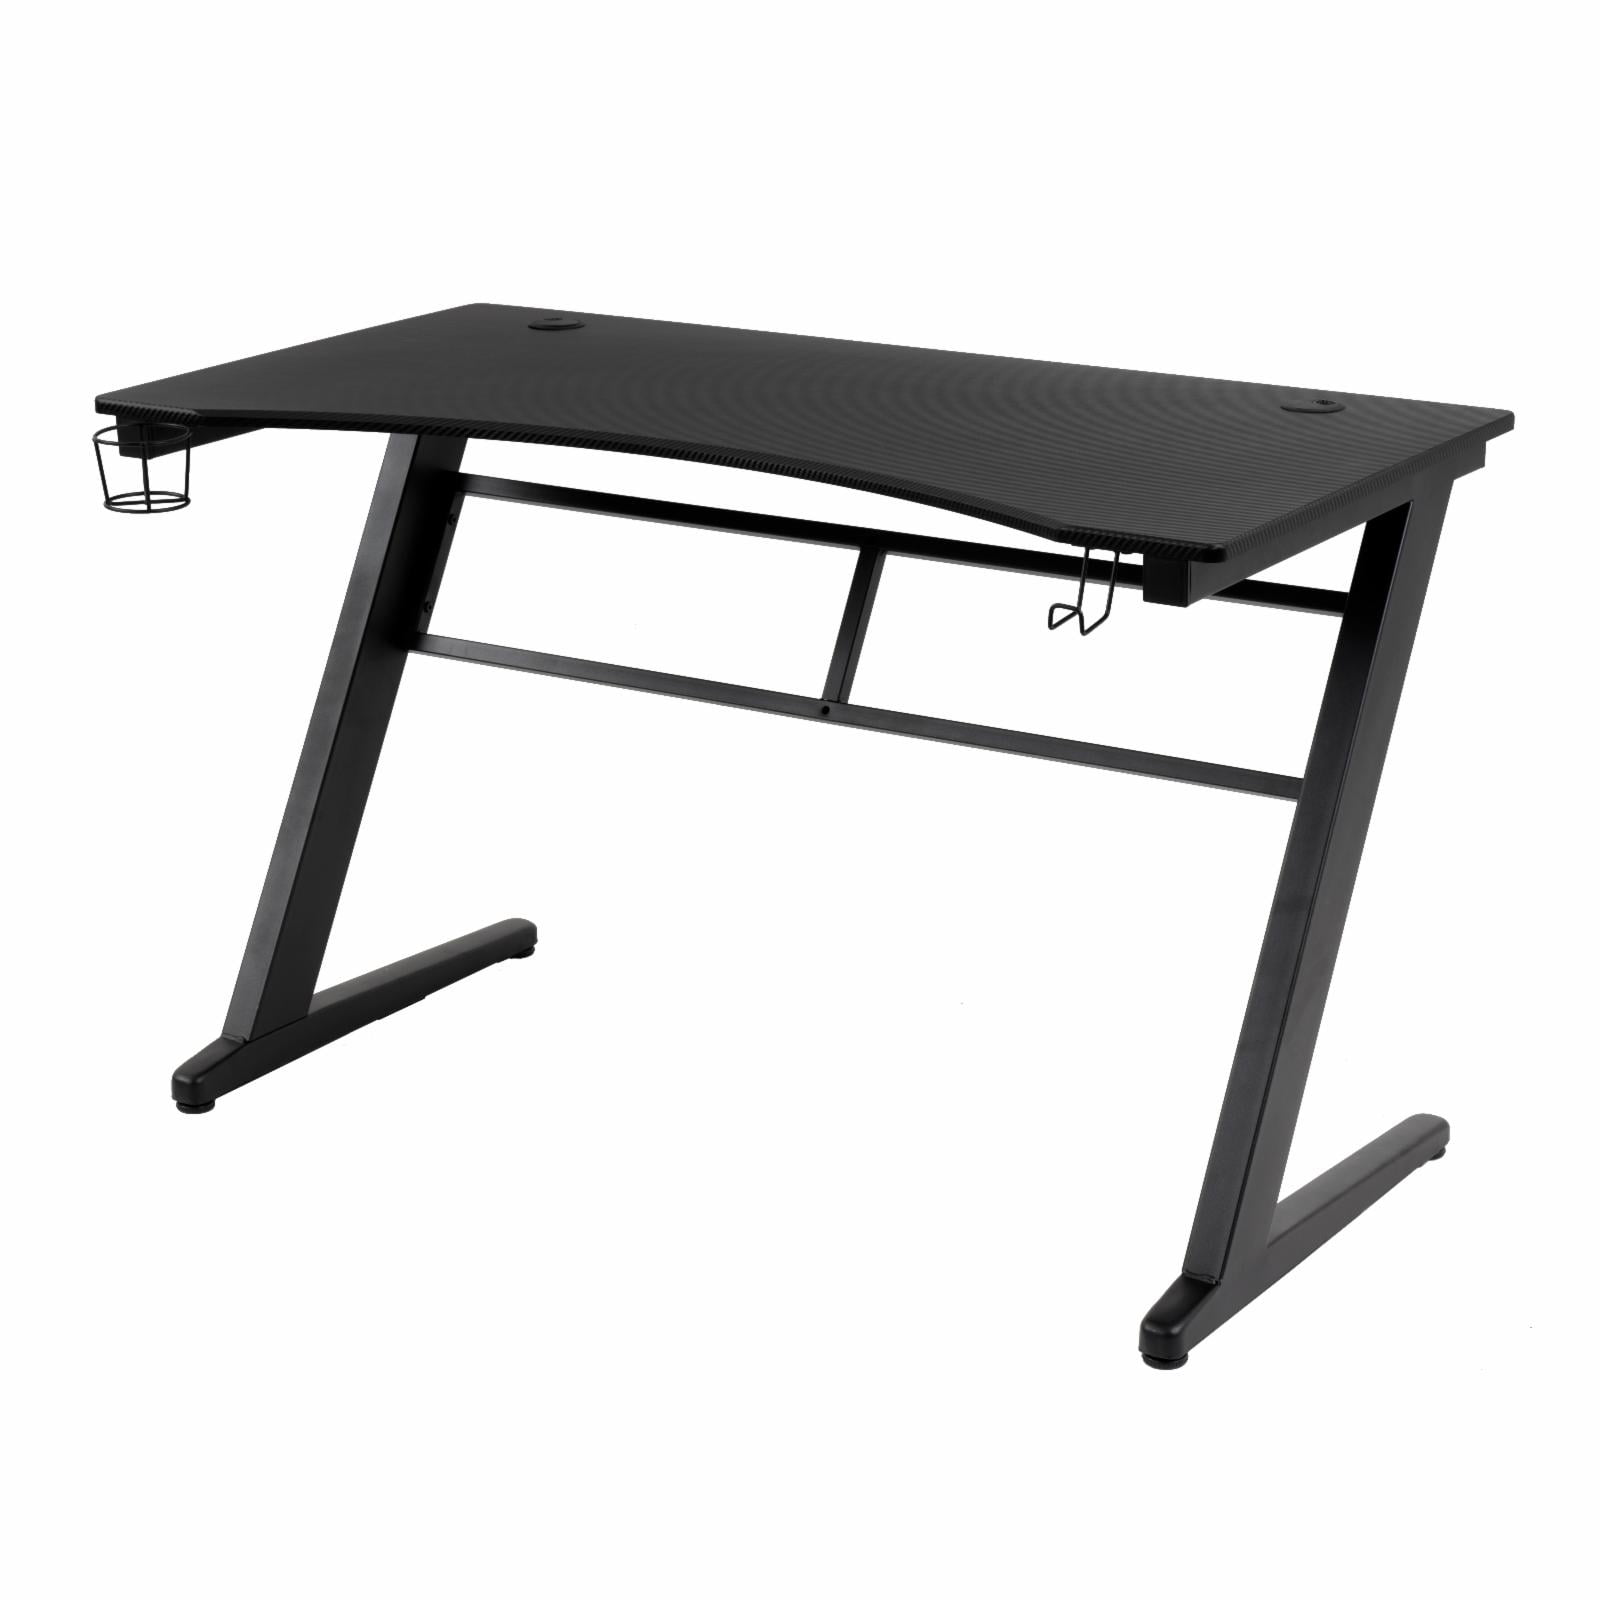 Picture of American Furniture Classics 42245 29 x 47 x 23.5 in. OS Home & Office Furniture Gaming Desk with Tactical Carbon Fiber Top